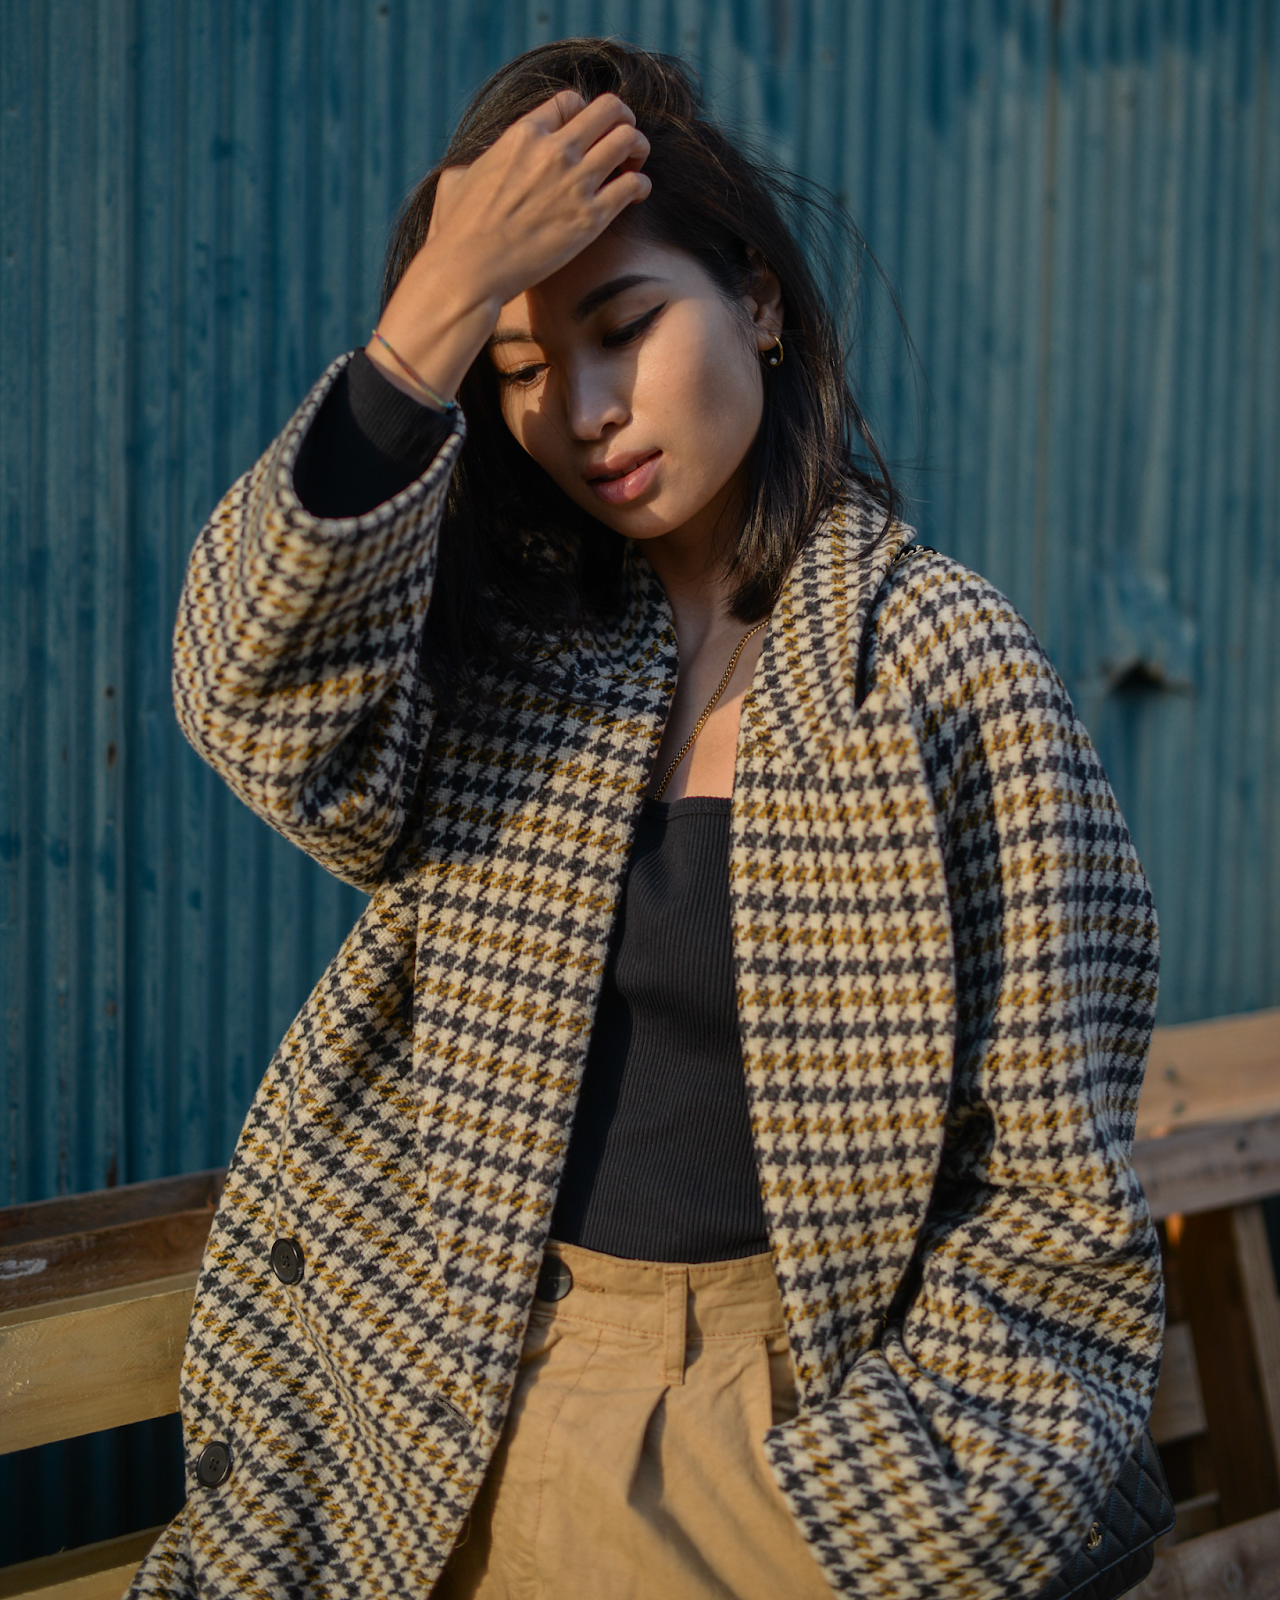 Spring plaids, Plaid for spring, easy spring outfits, beige trousers with black top, square neck tops, Tokyo street style, spring transitional outfits - FOREVERVANNY.com